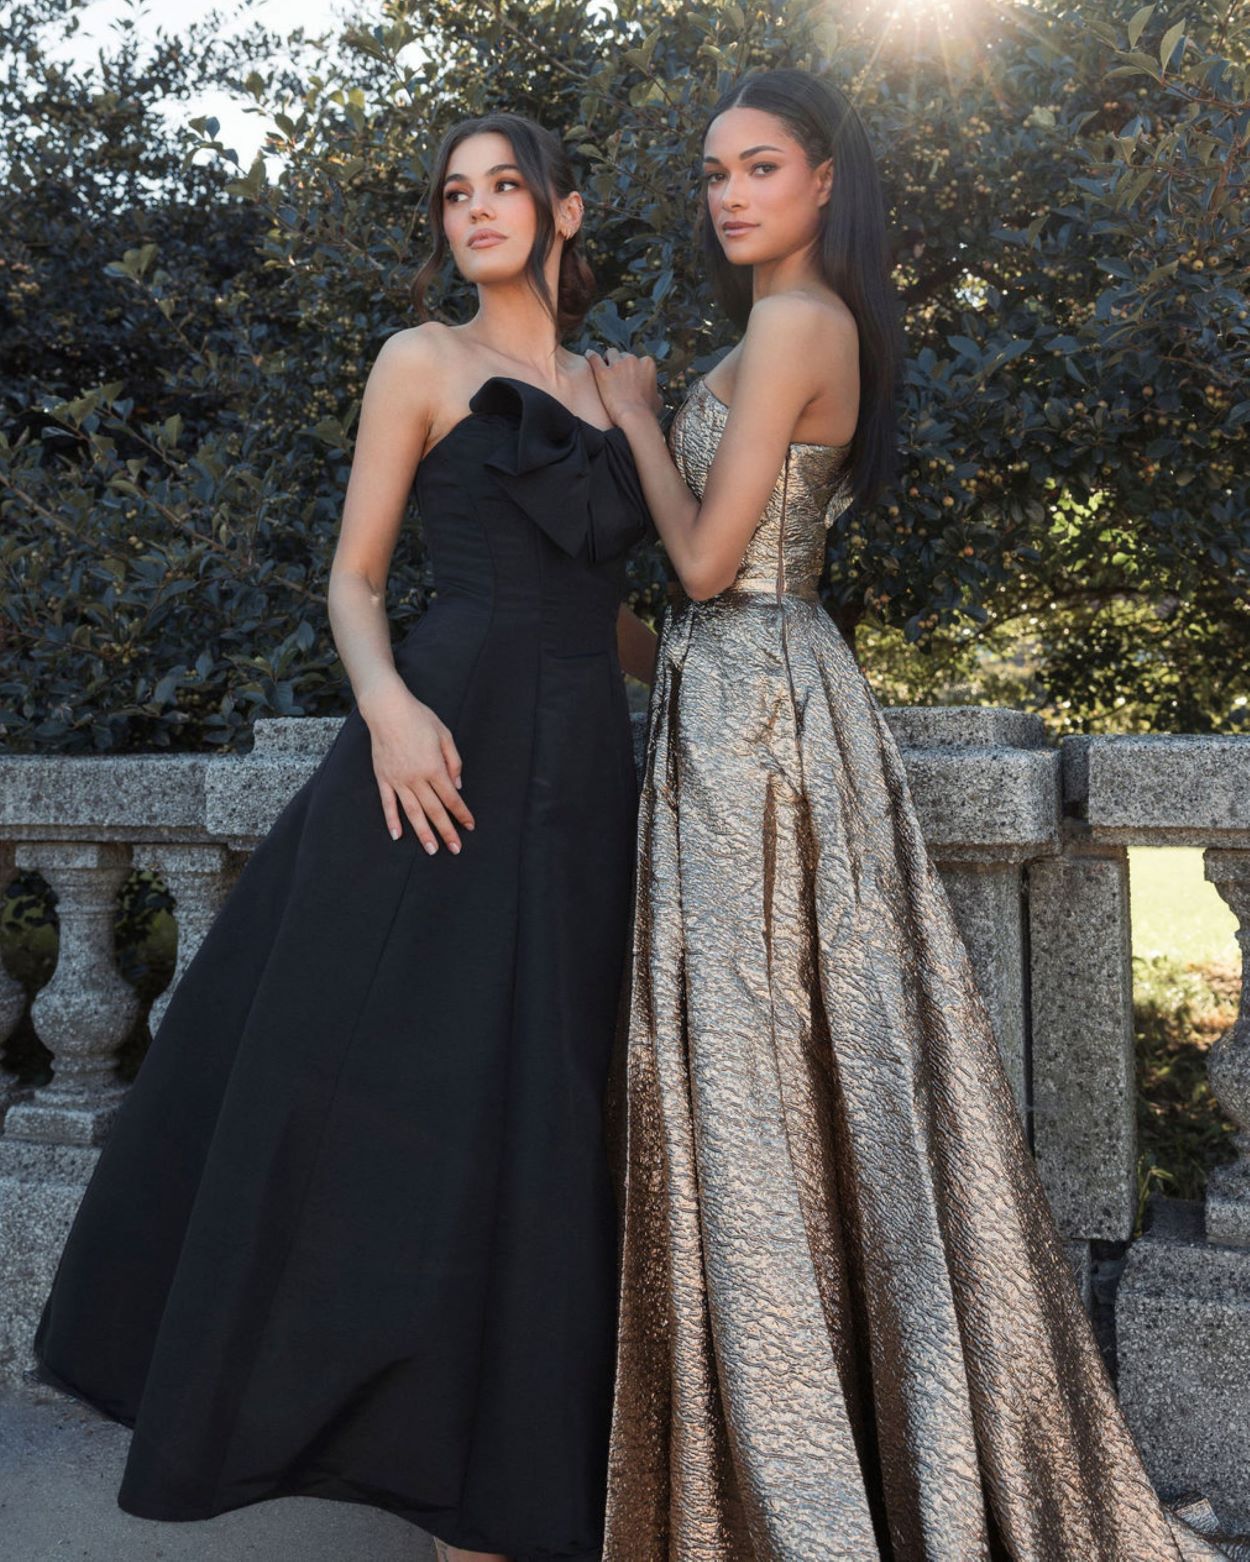 JVN65851 - Nikki's Glitz and Glam Boutique| Prom| Prom Dress| Long Prom  Dress| Prom Dresses| Prom 2021 Dress |Prom 2021 | Spring Prom | Prom Dresses|  Sherri Hill Prom Dress | Formal |